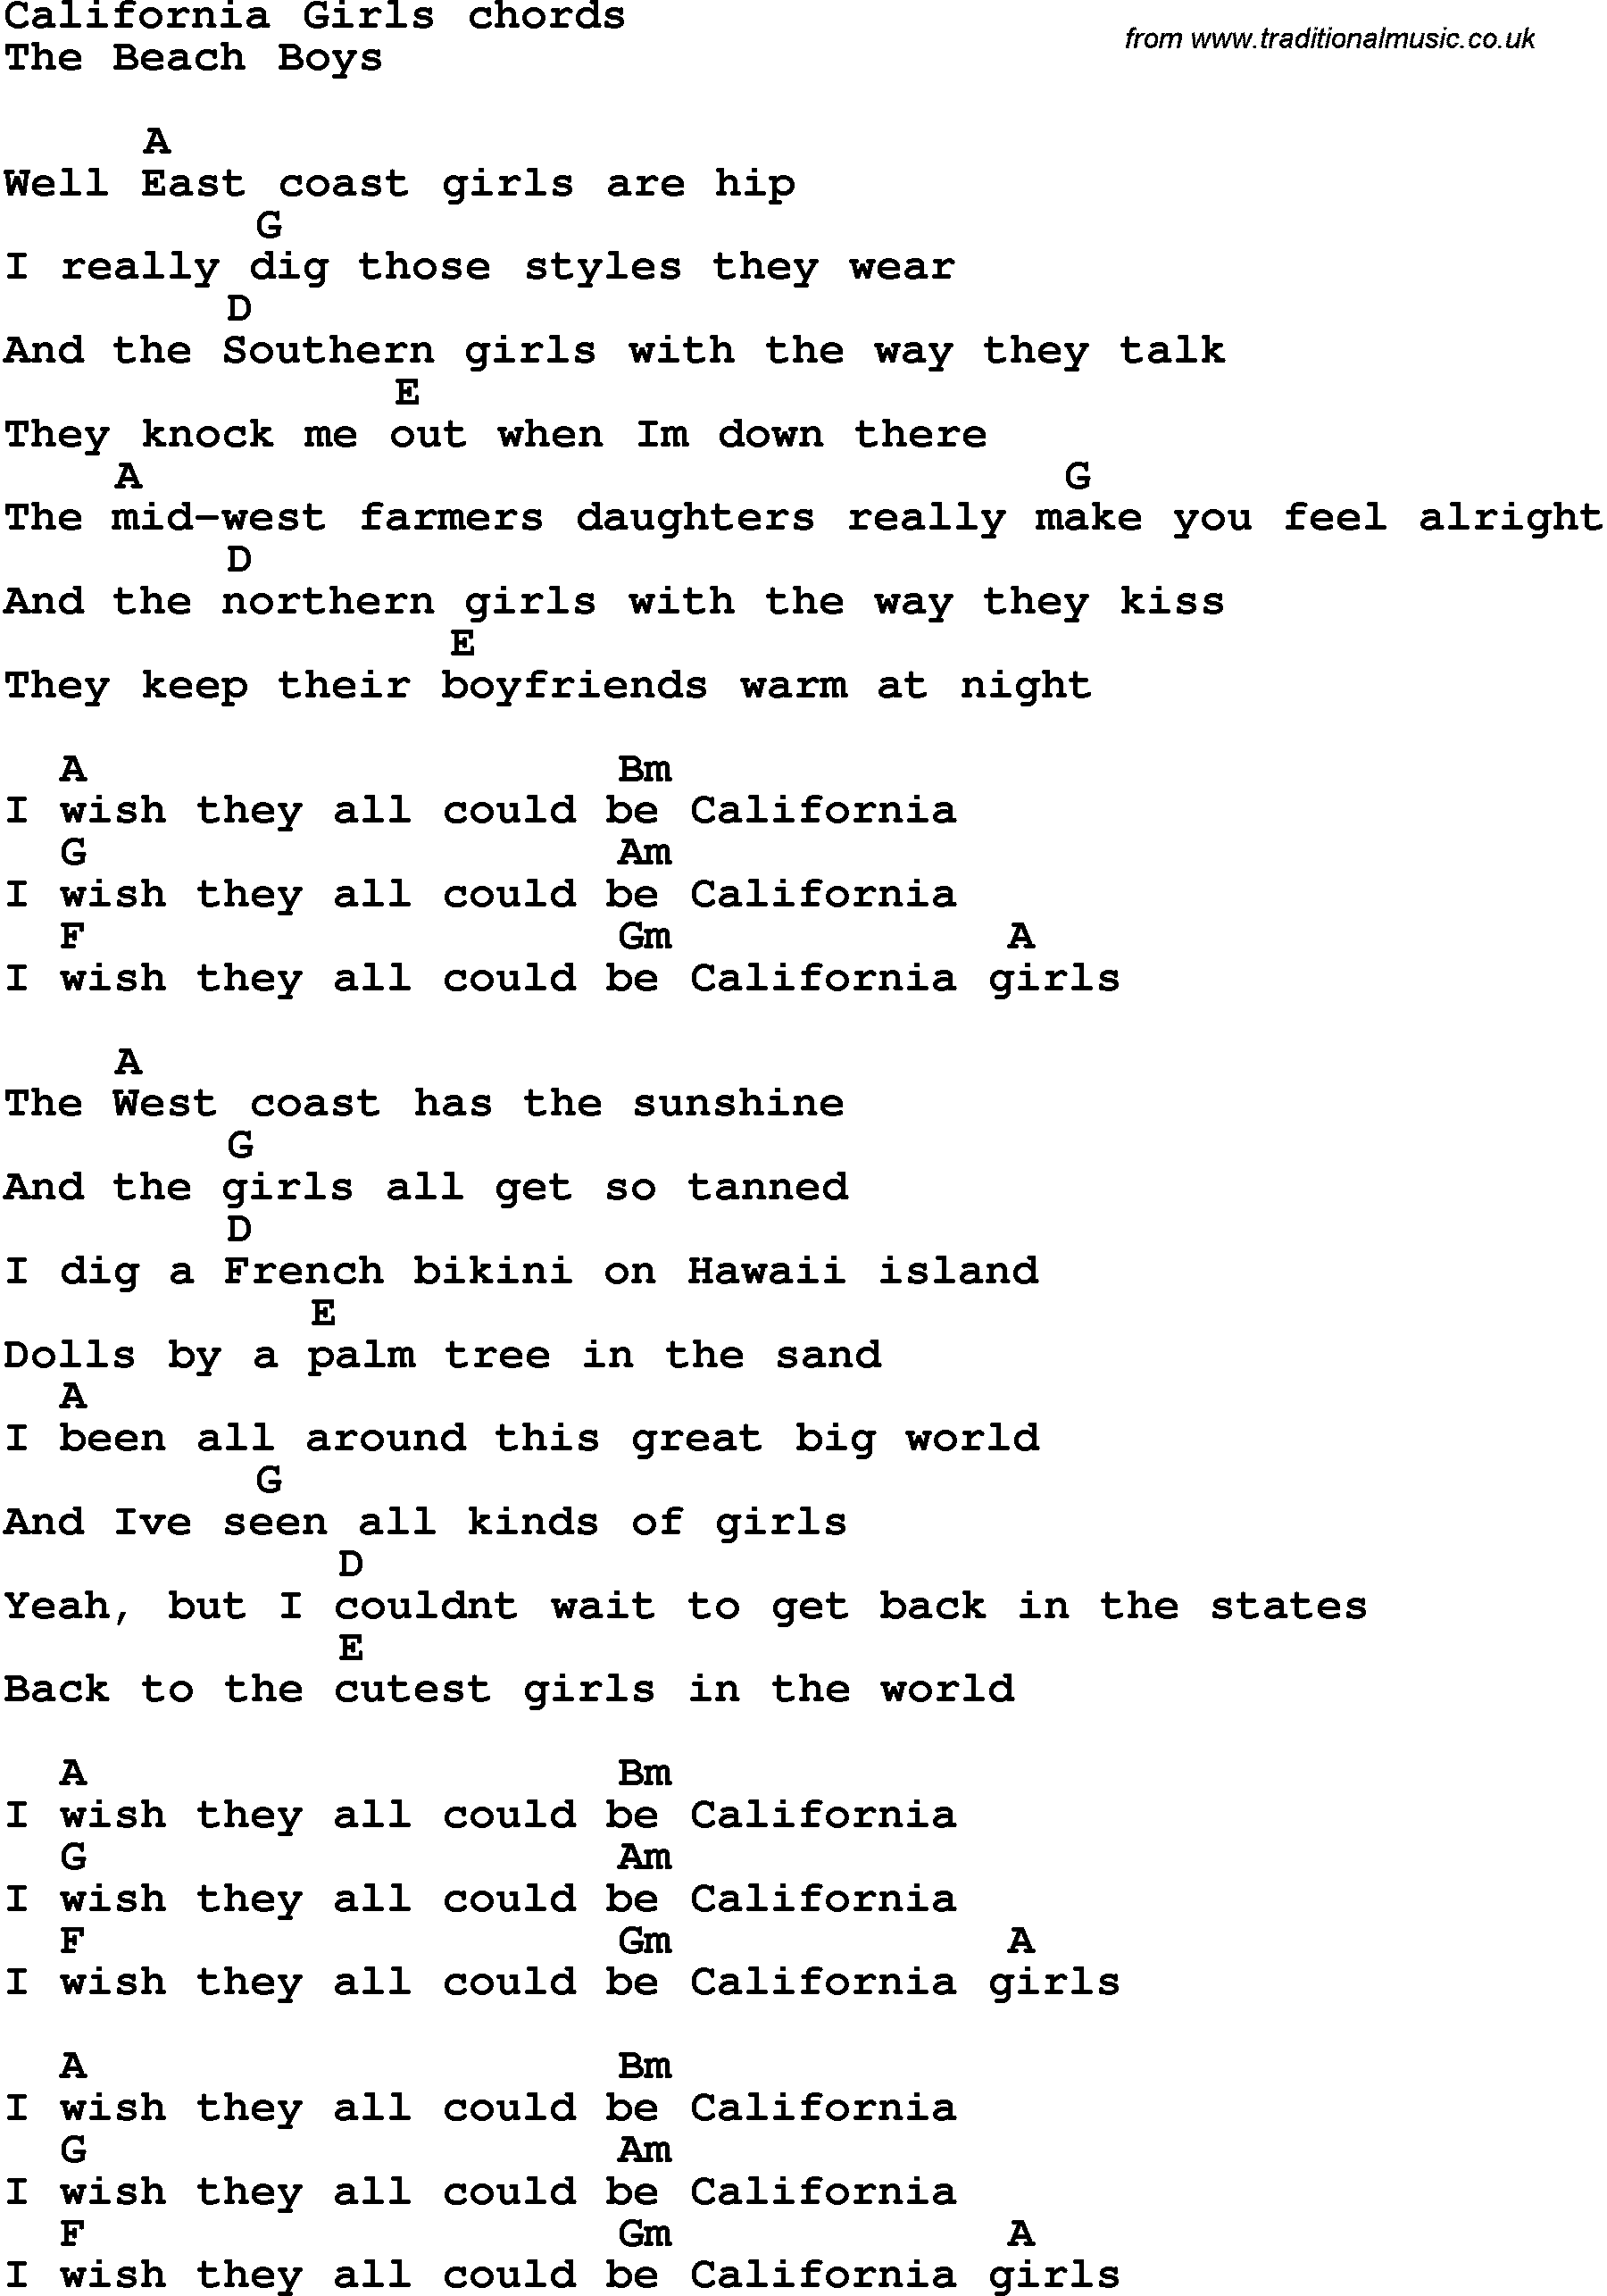 Song Lyrics with guitar chords for California Girls